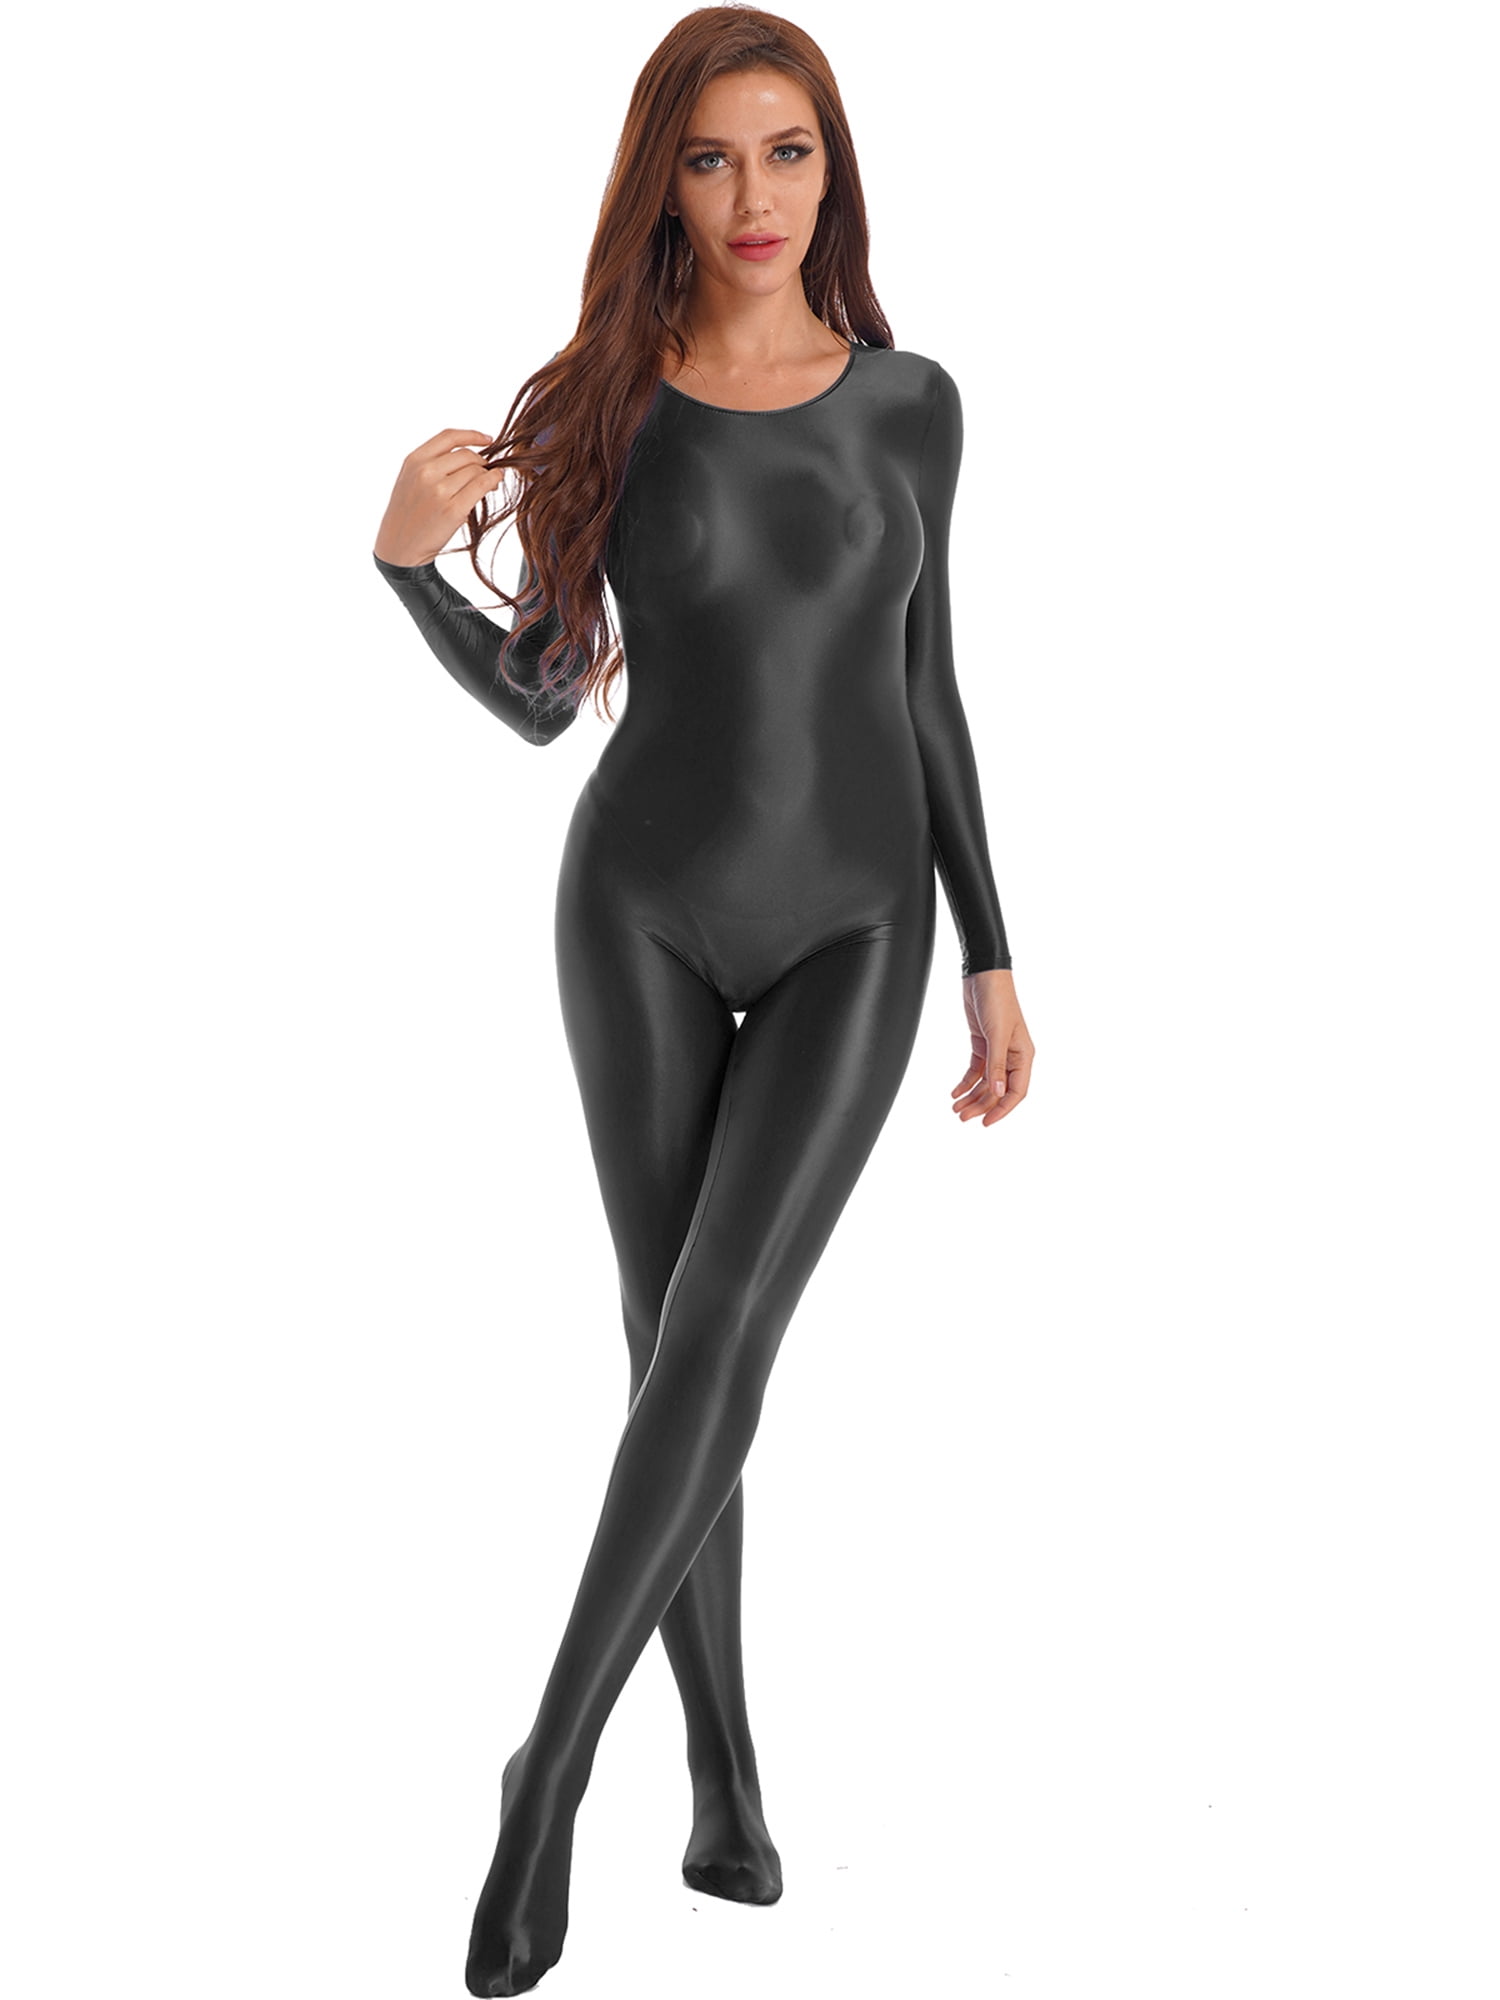 YEAHDOR Womens Full Body Long Sleeve Footed Jumpsuit Silky Shiny Rompers  High Elastic Bodysuit Clubwear Black M